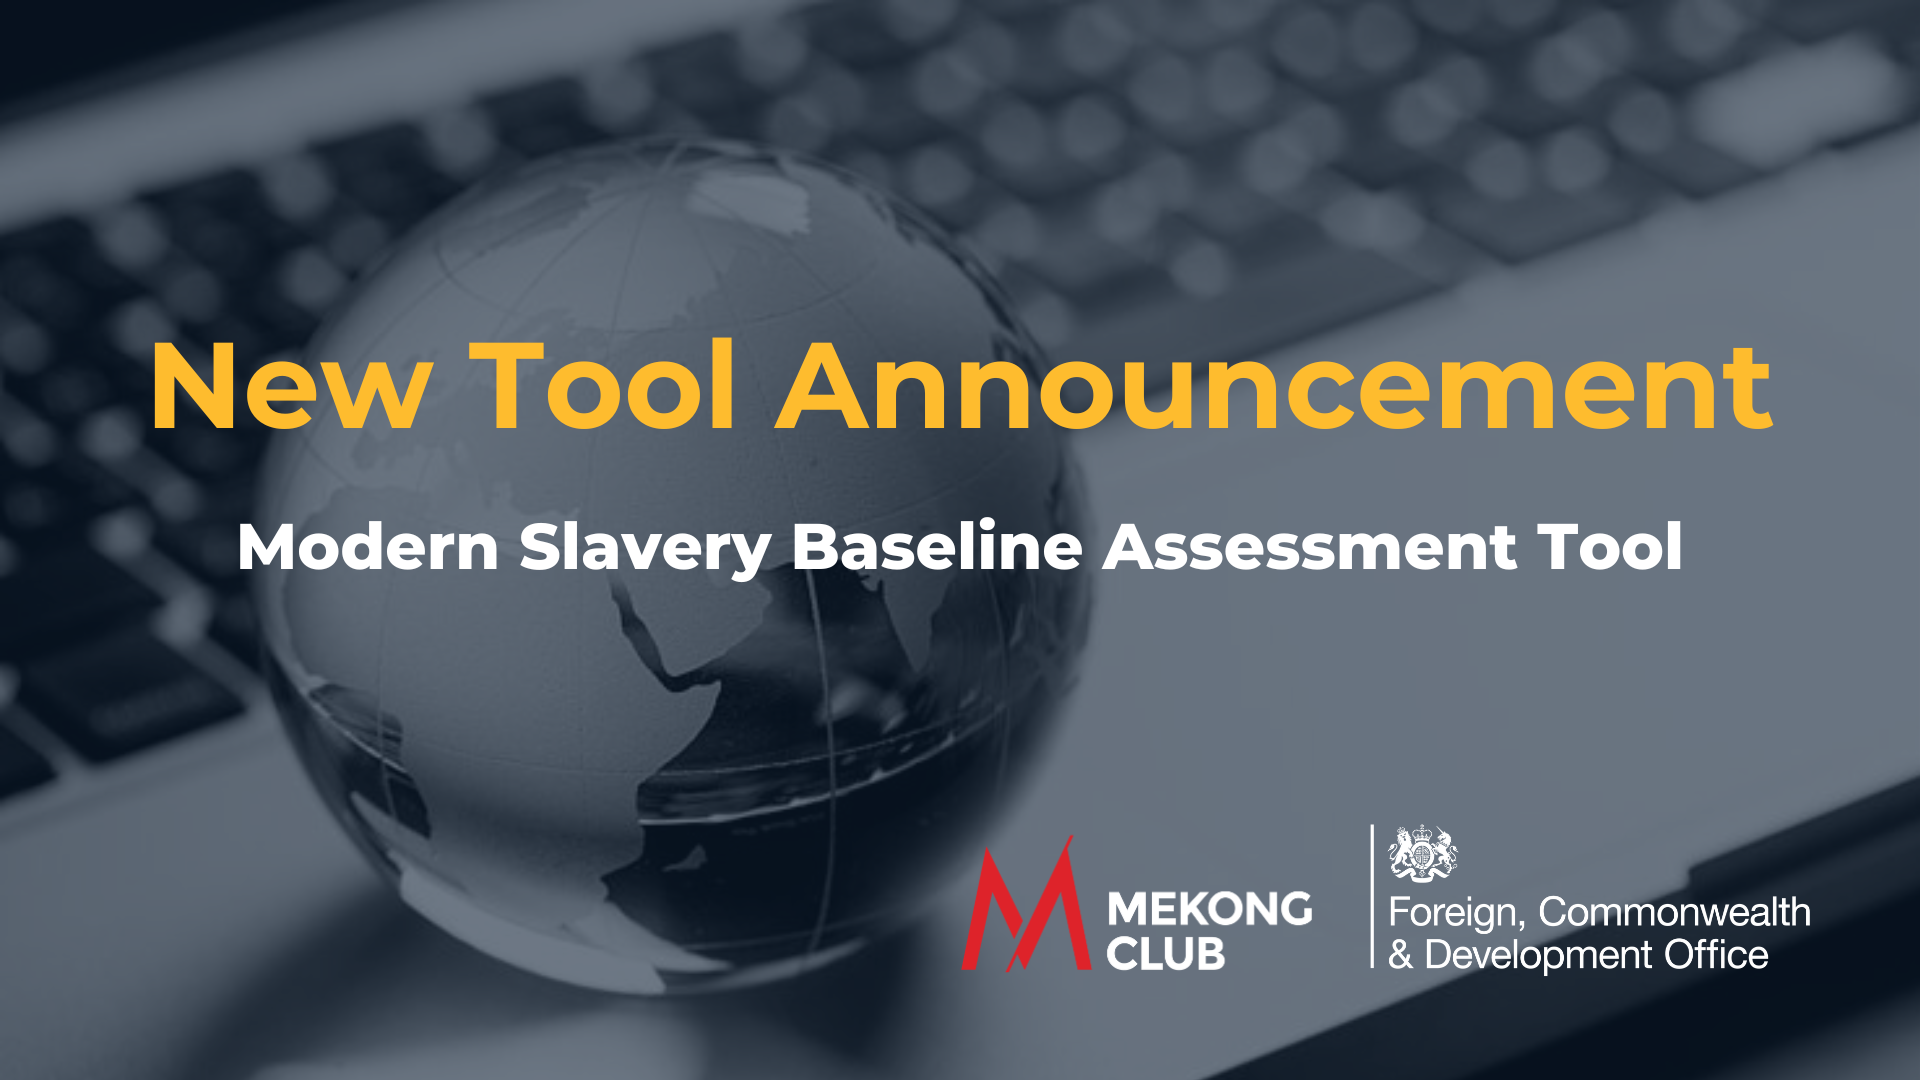 Mekong Club Launches Modern Slavery Baseline Assessment Tool with UK Consulate Support